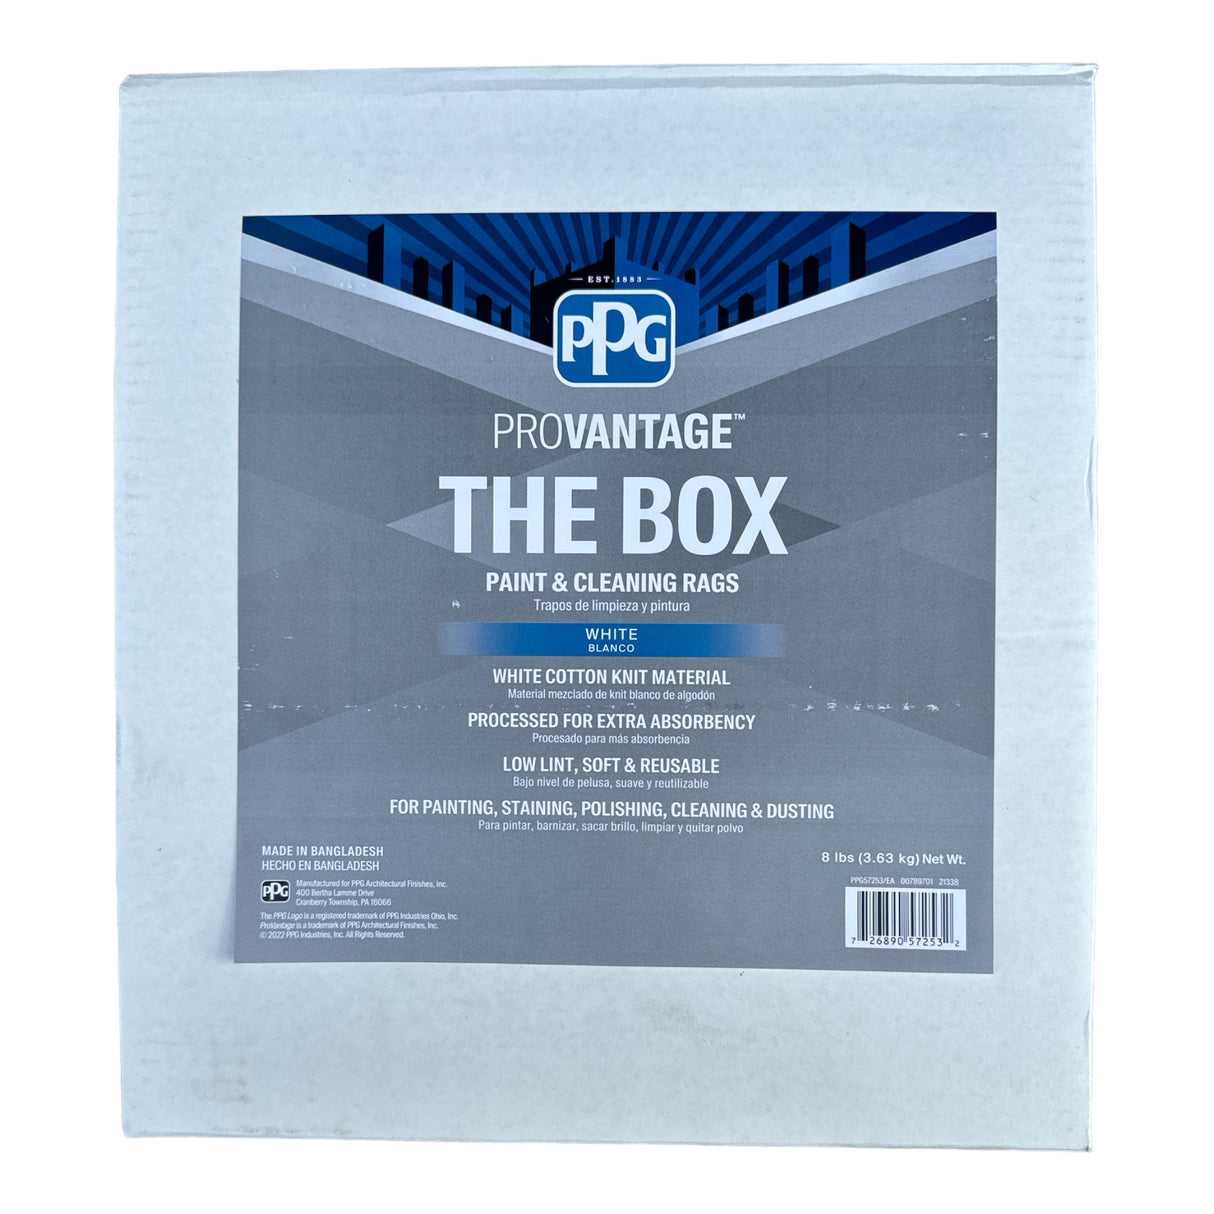 PPG ProVantage “The Box” Paint & Cleaning Rags